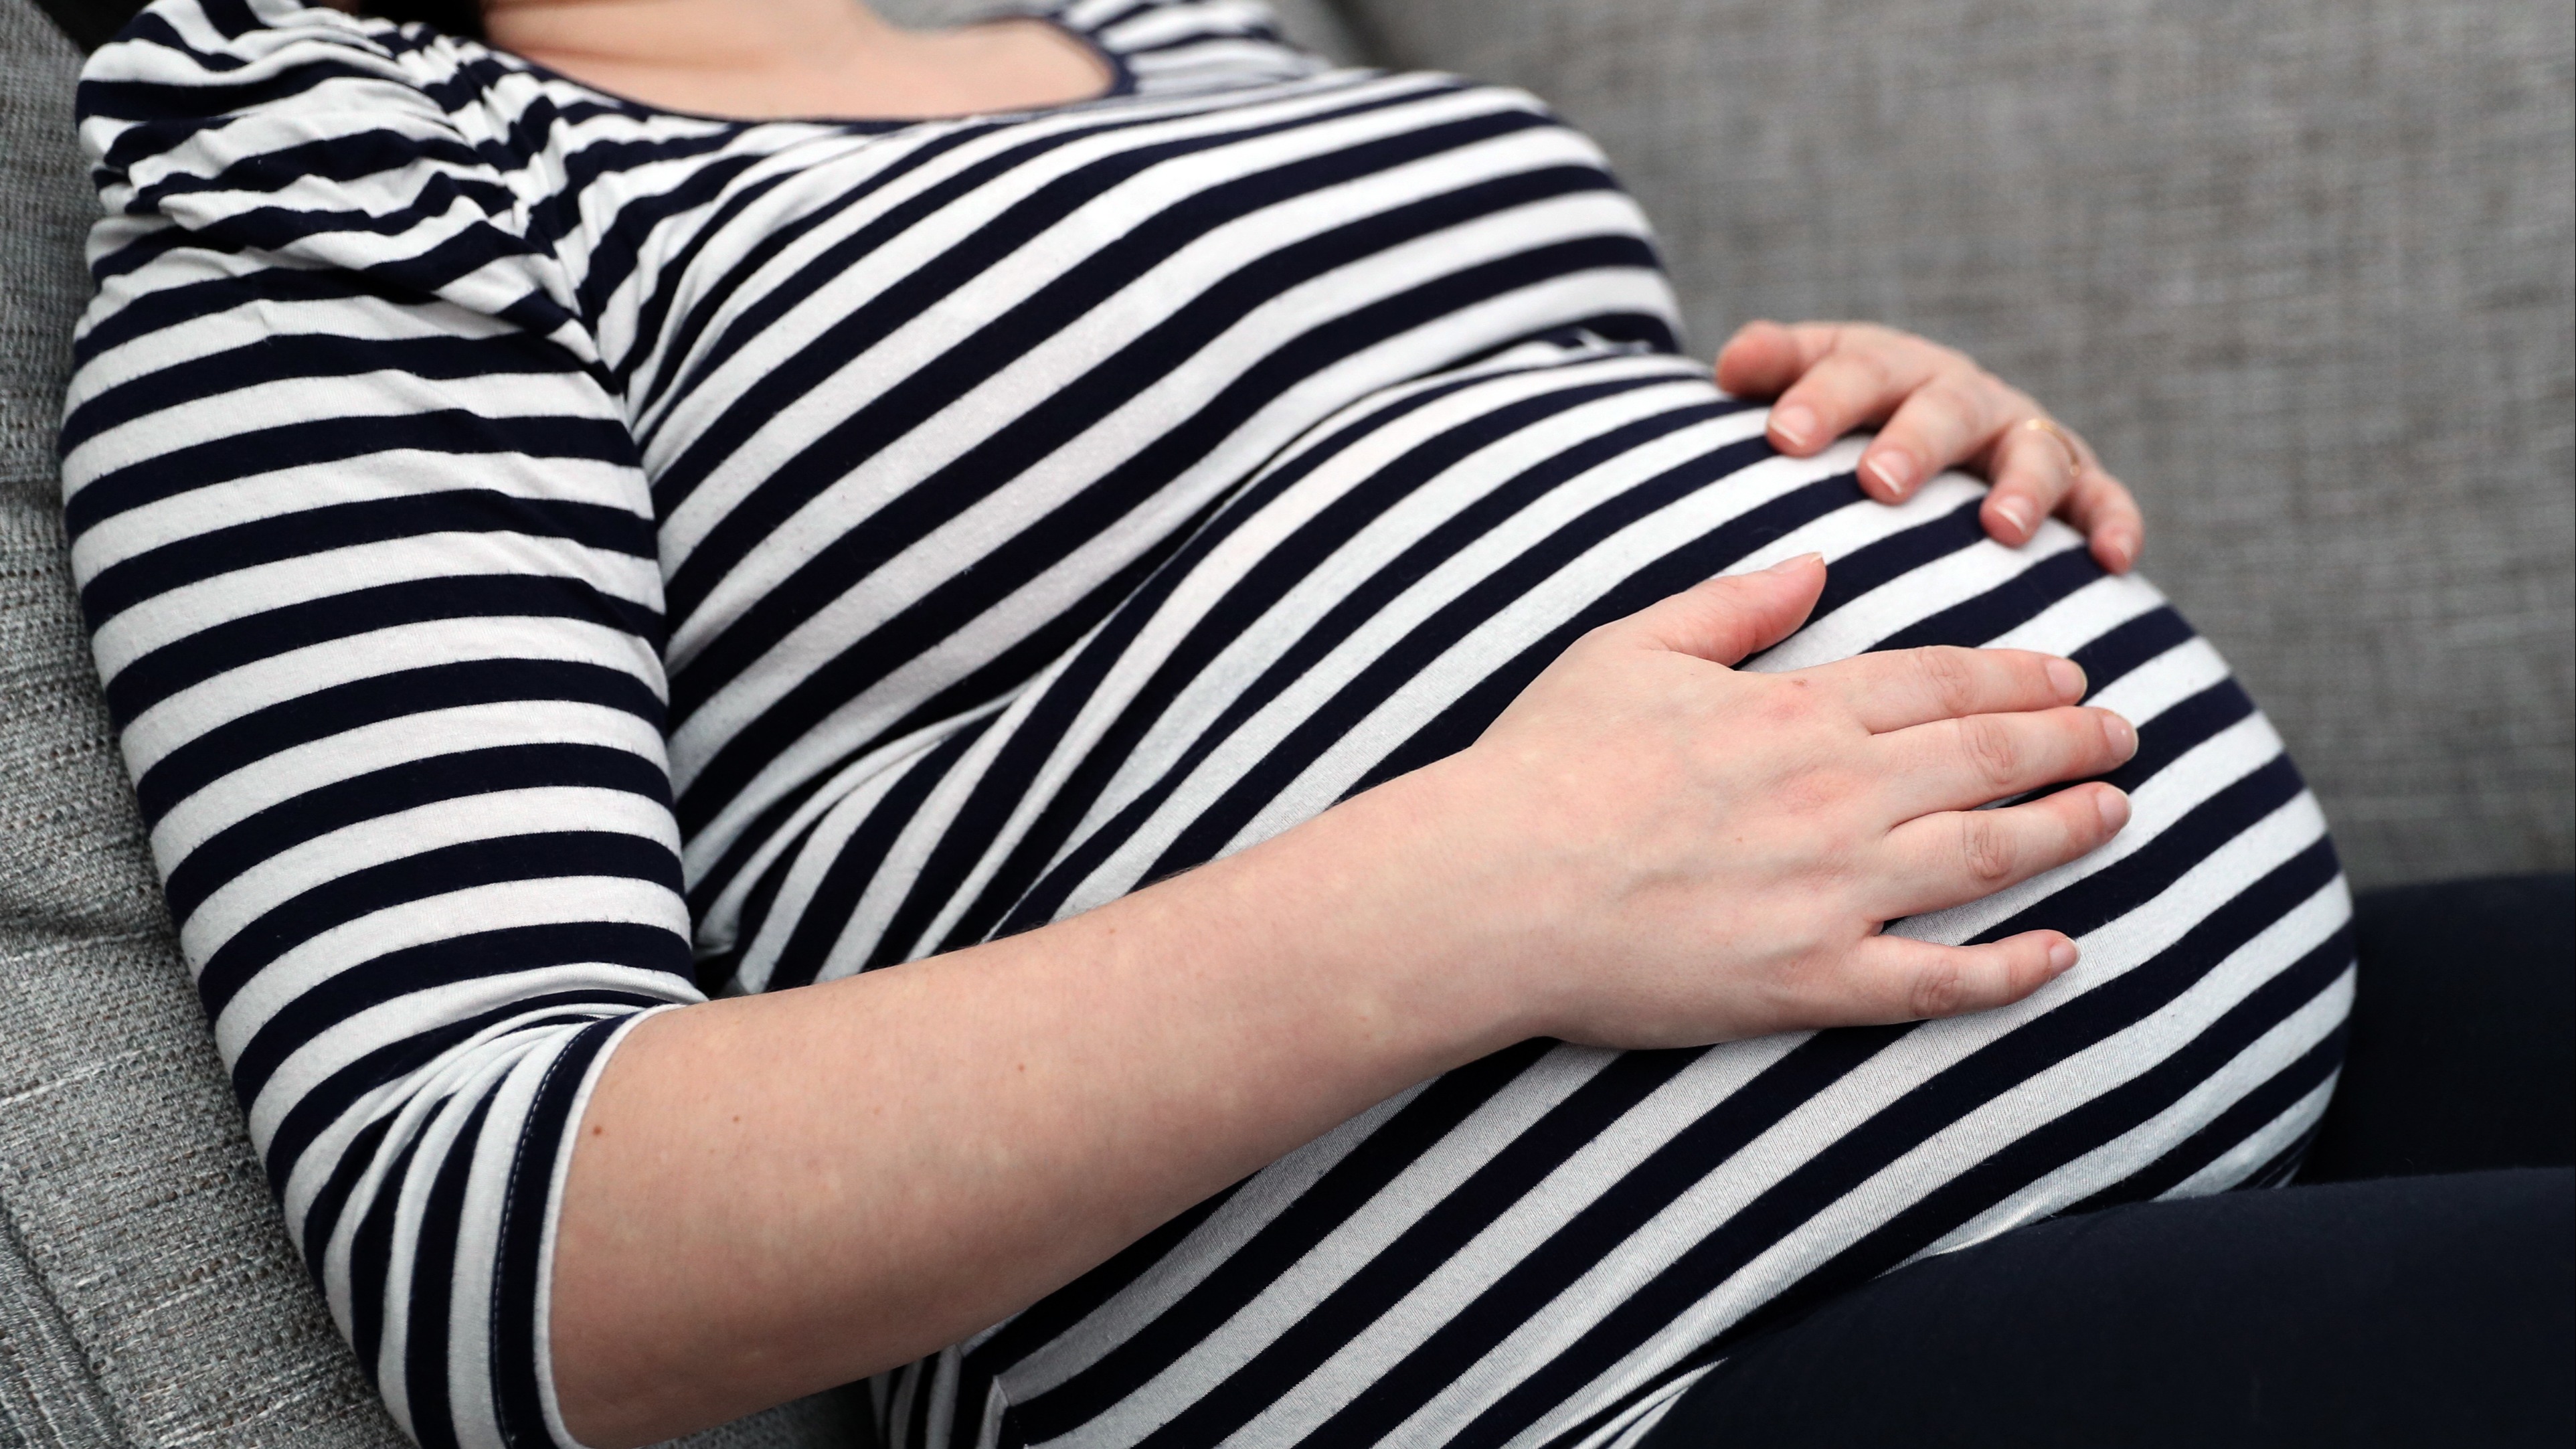 Pregnant women could be offered £400 shopping vouchers to quit smoking -  Heart